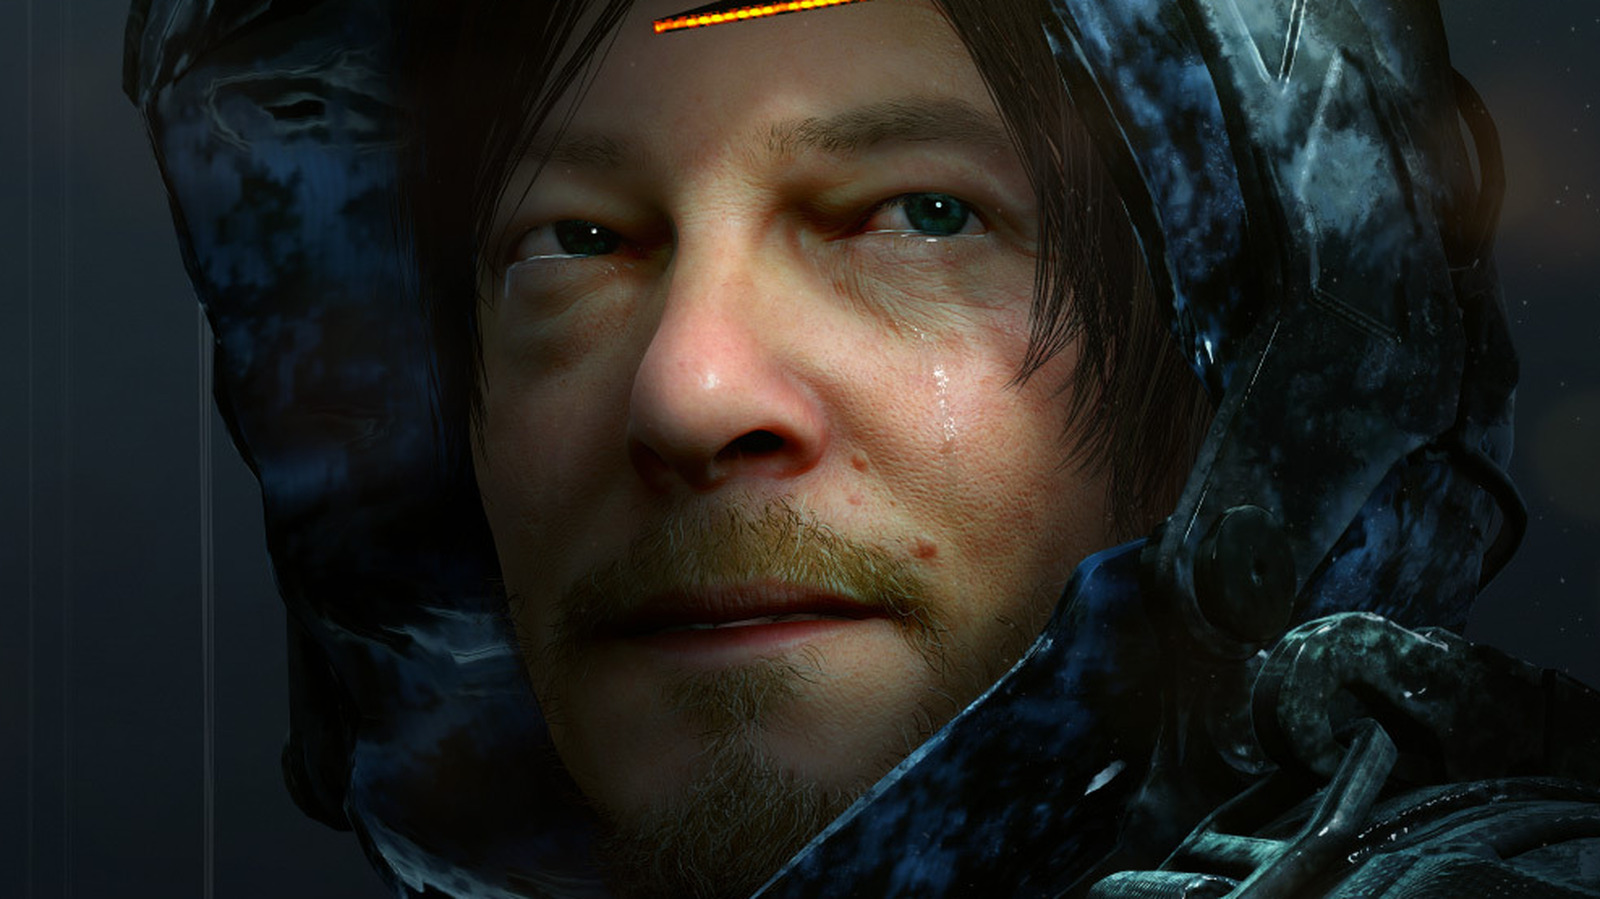 Death Stranding Directors Cut (PS5) cheap - Price of $14.99